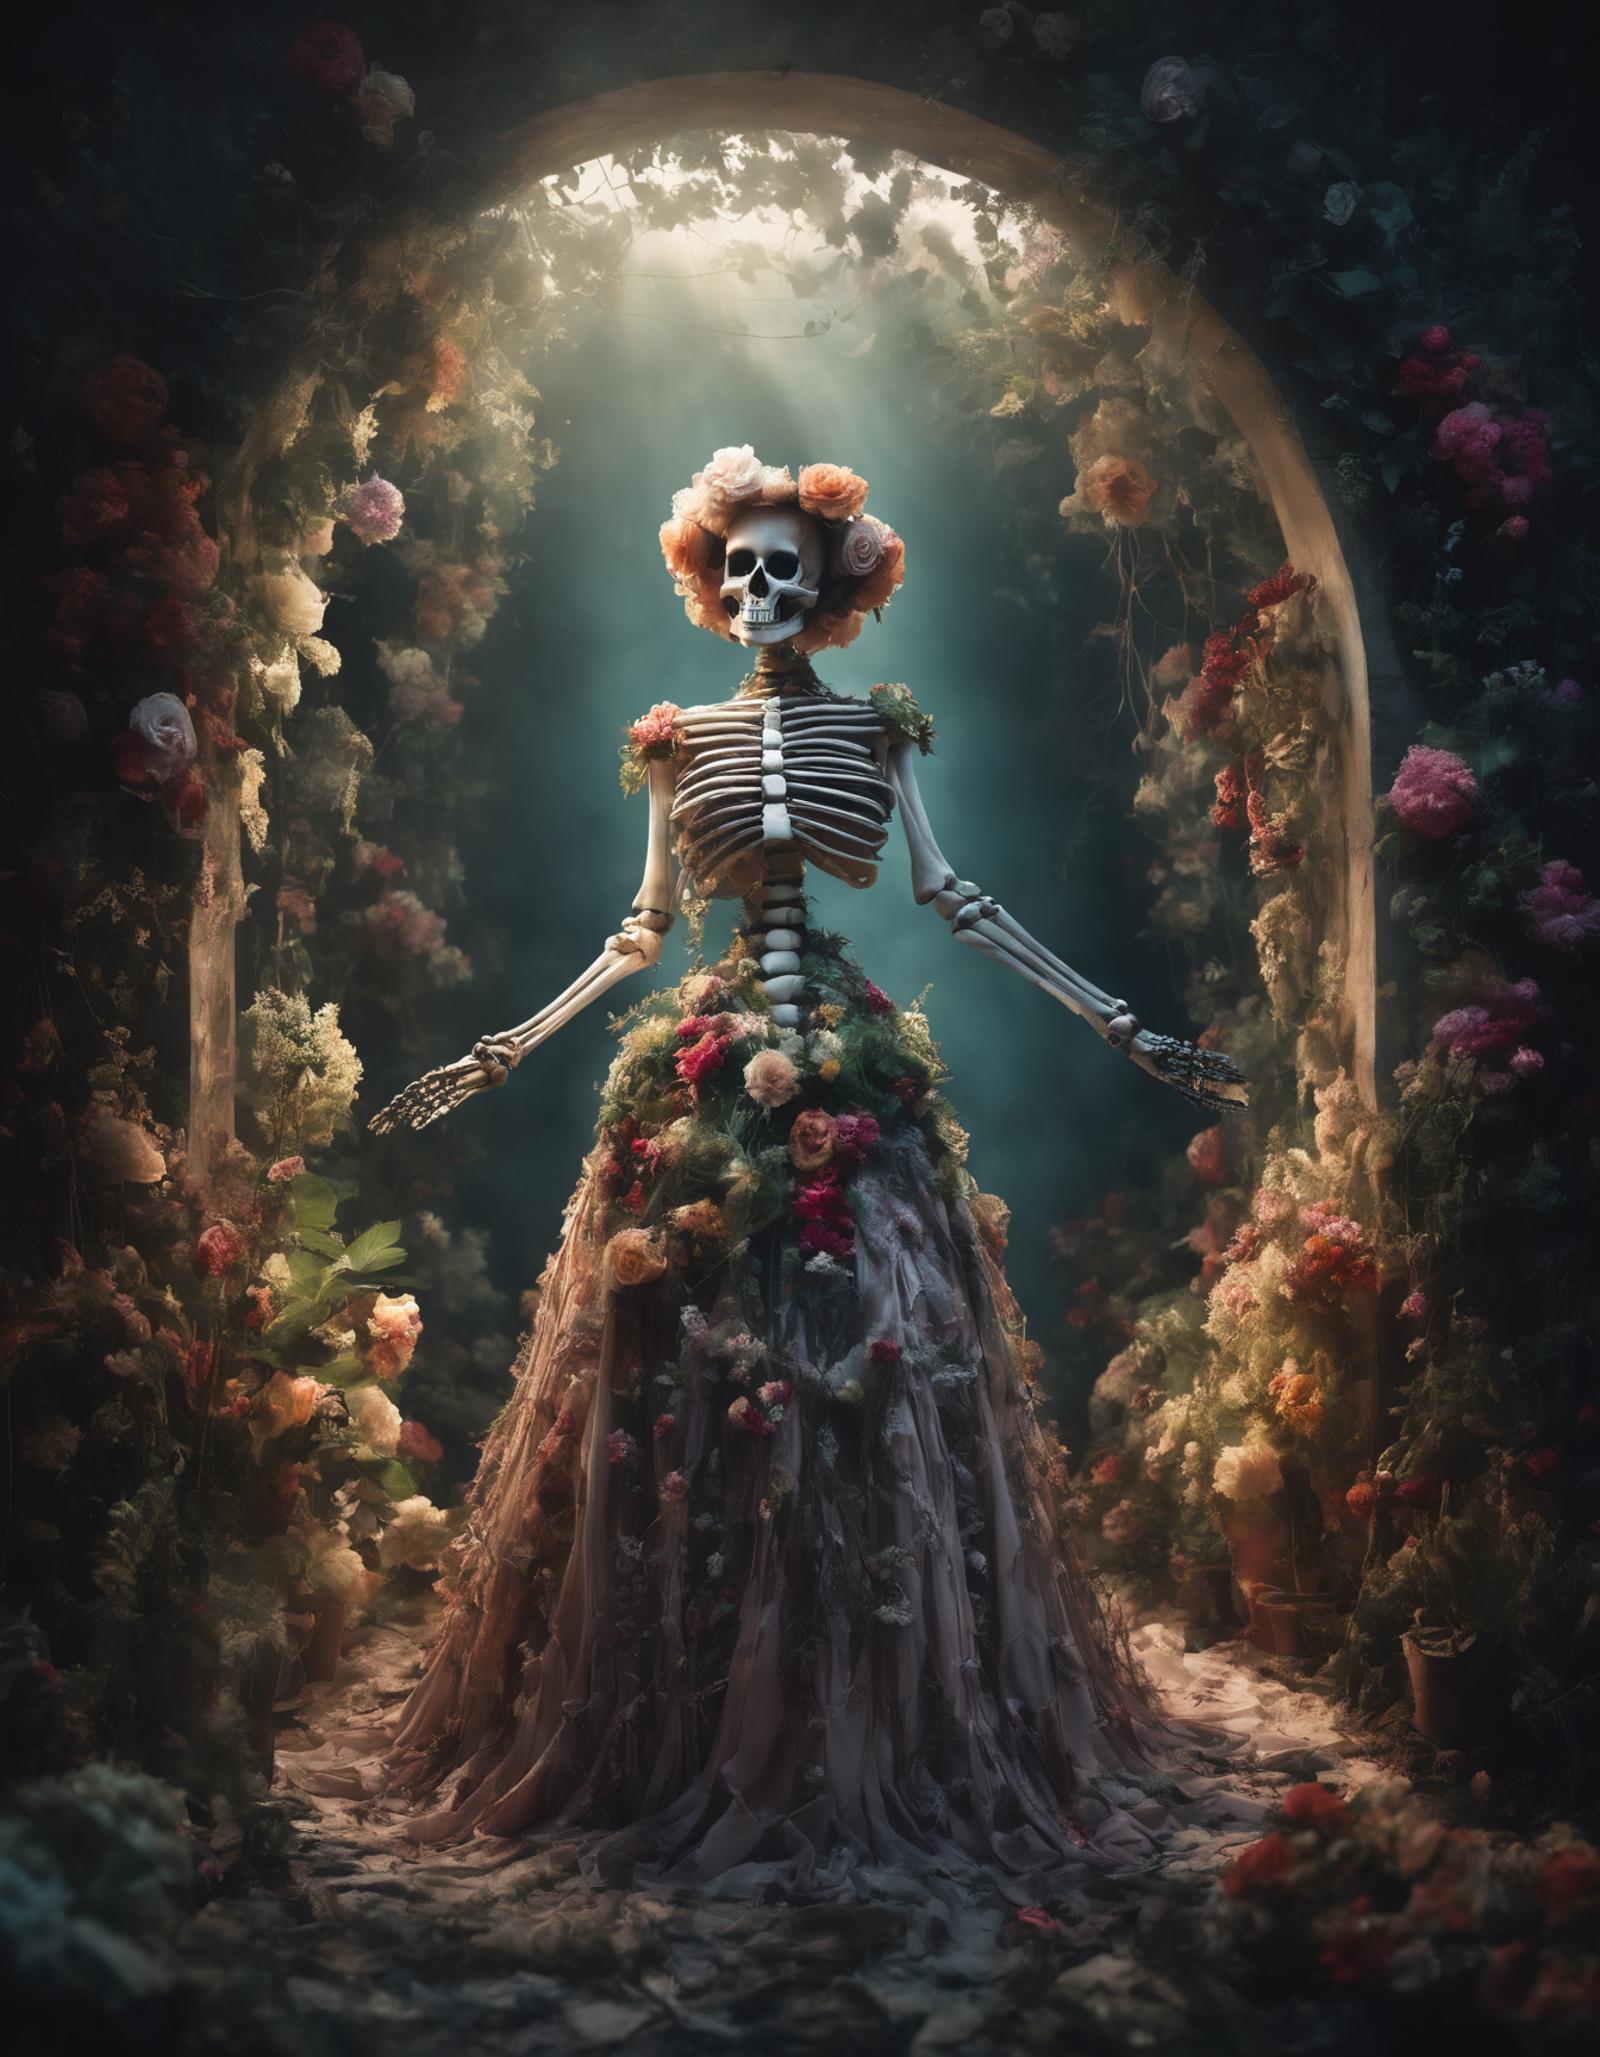 A skeleton bride in a floral dress surrounded by flowers and greenery.